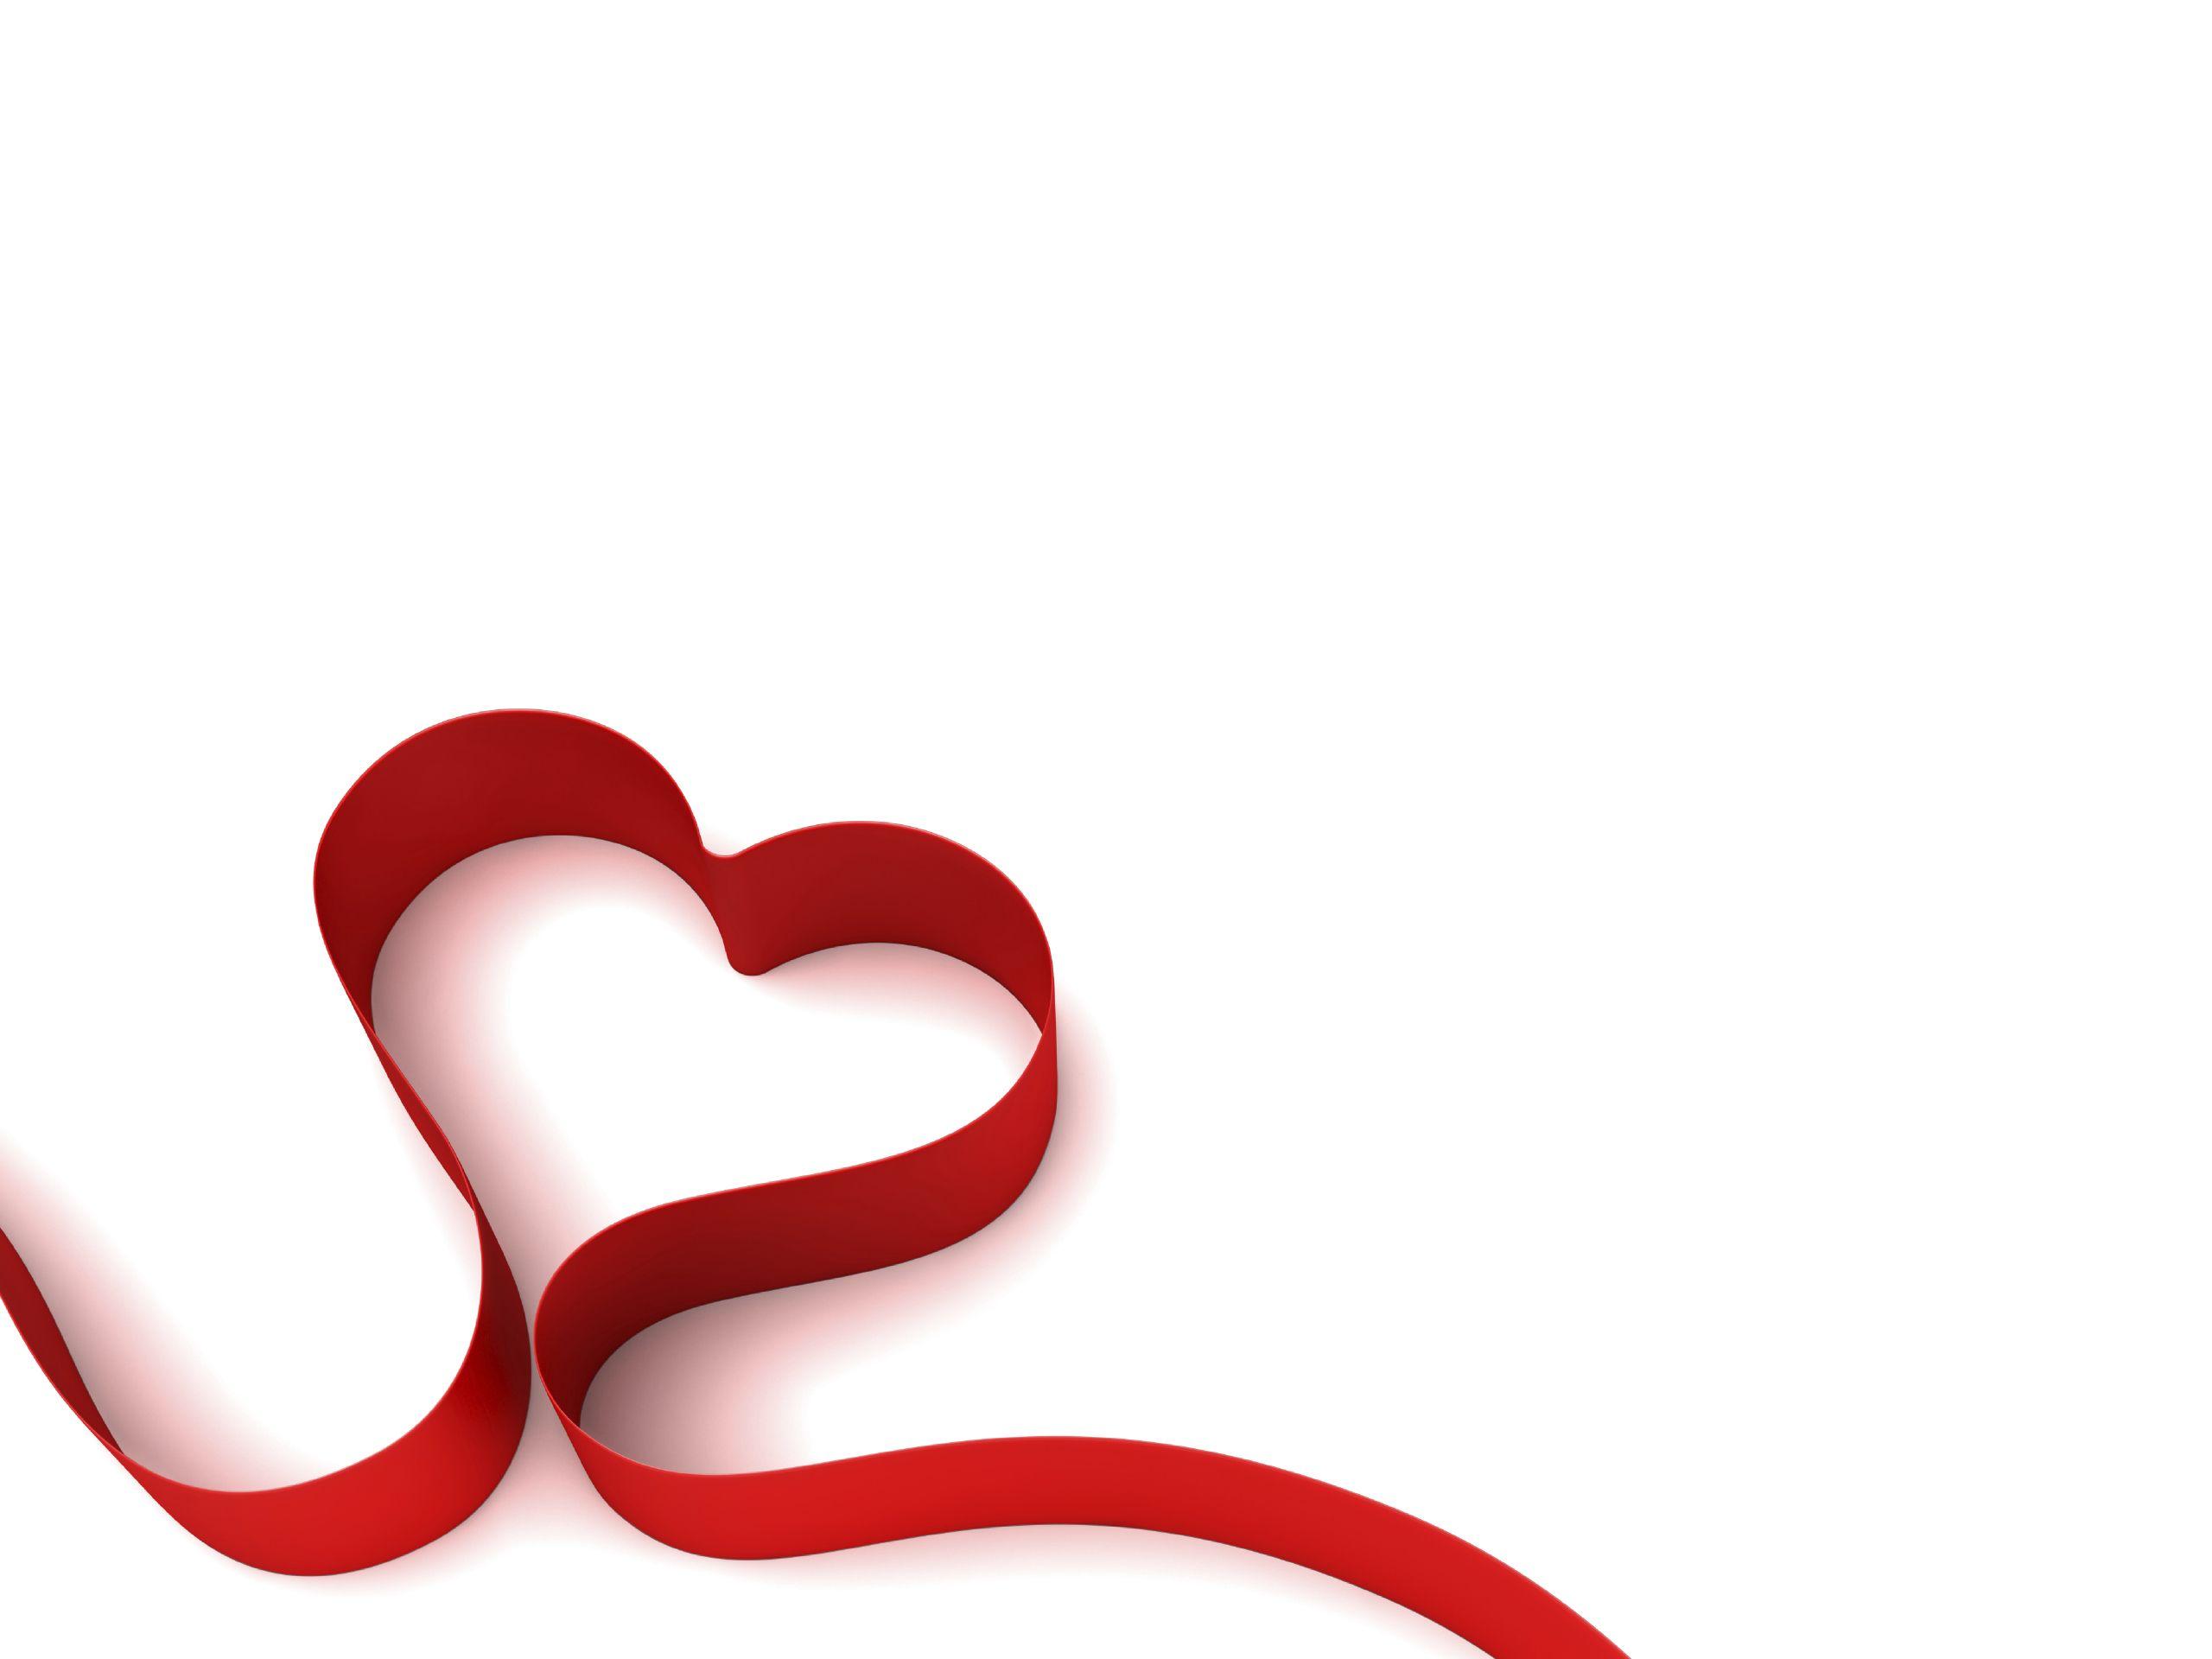 Simple Heart Background 17777 2560x1920 px